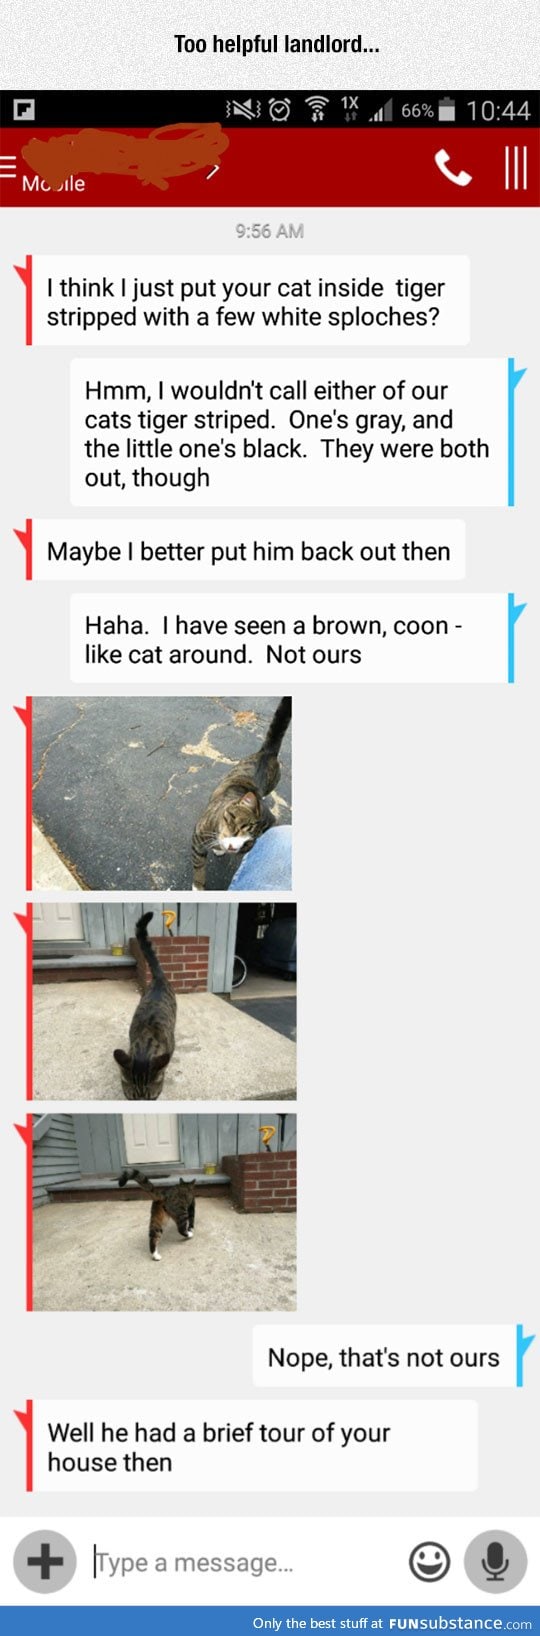 Landlord finds cat